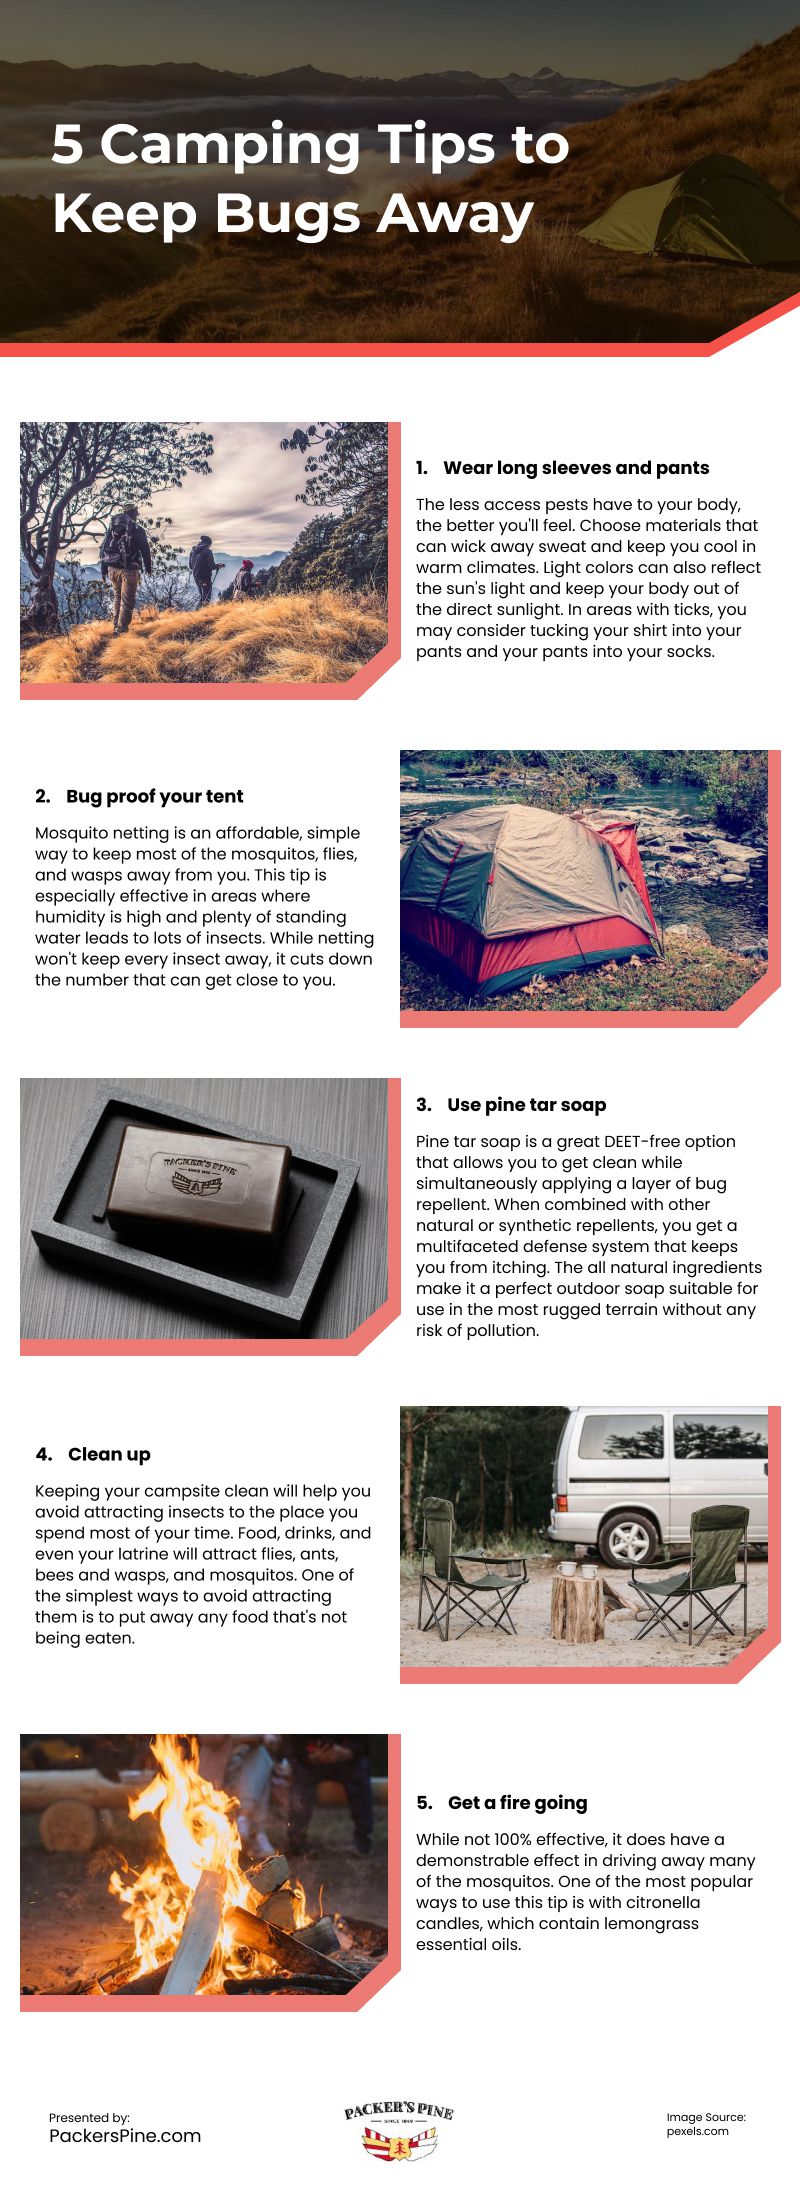 5 Camping Tips to Keep Bugs Away Infographic